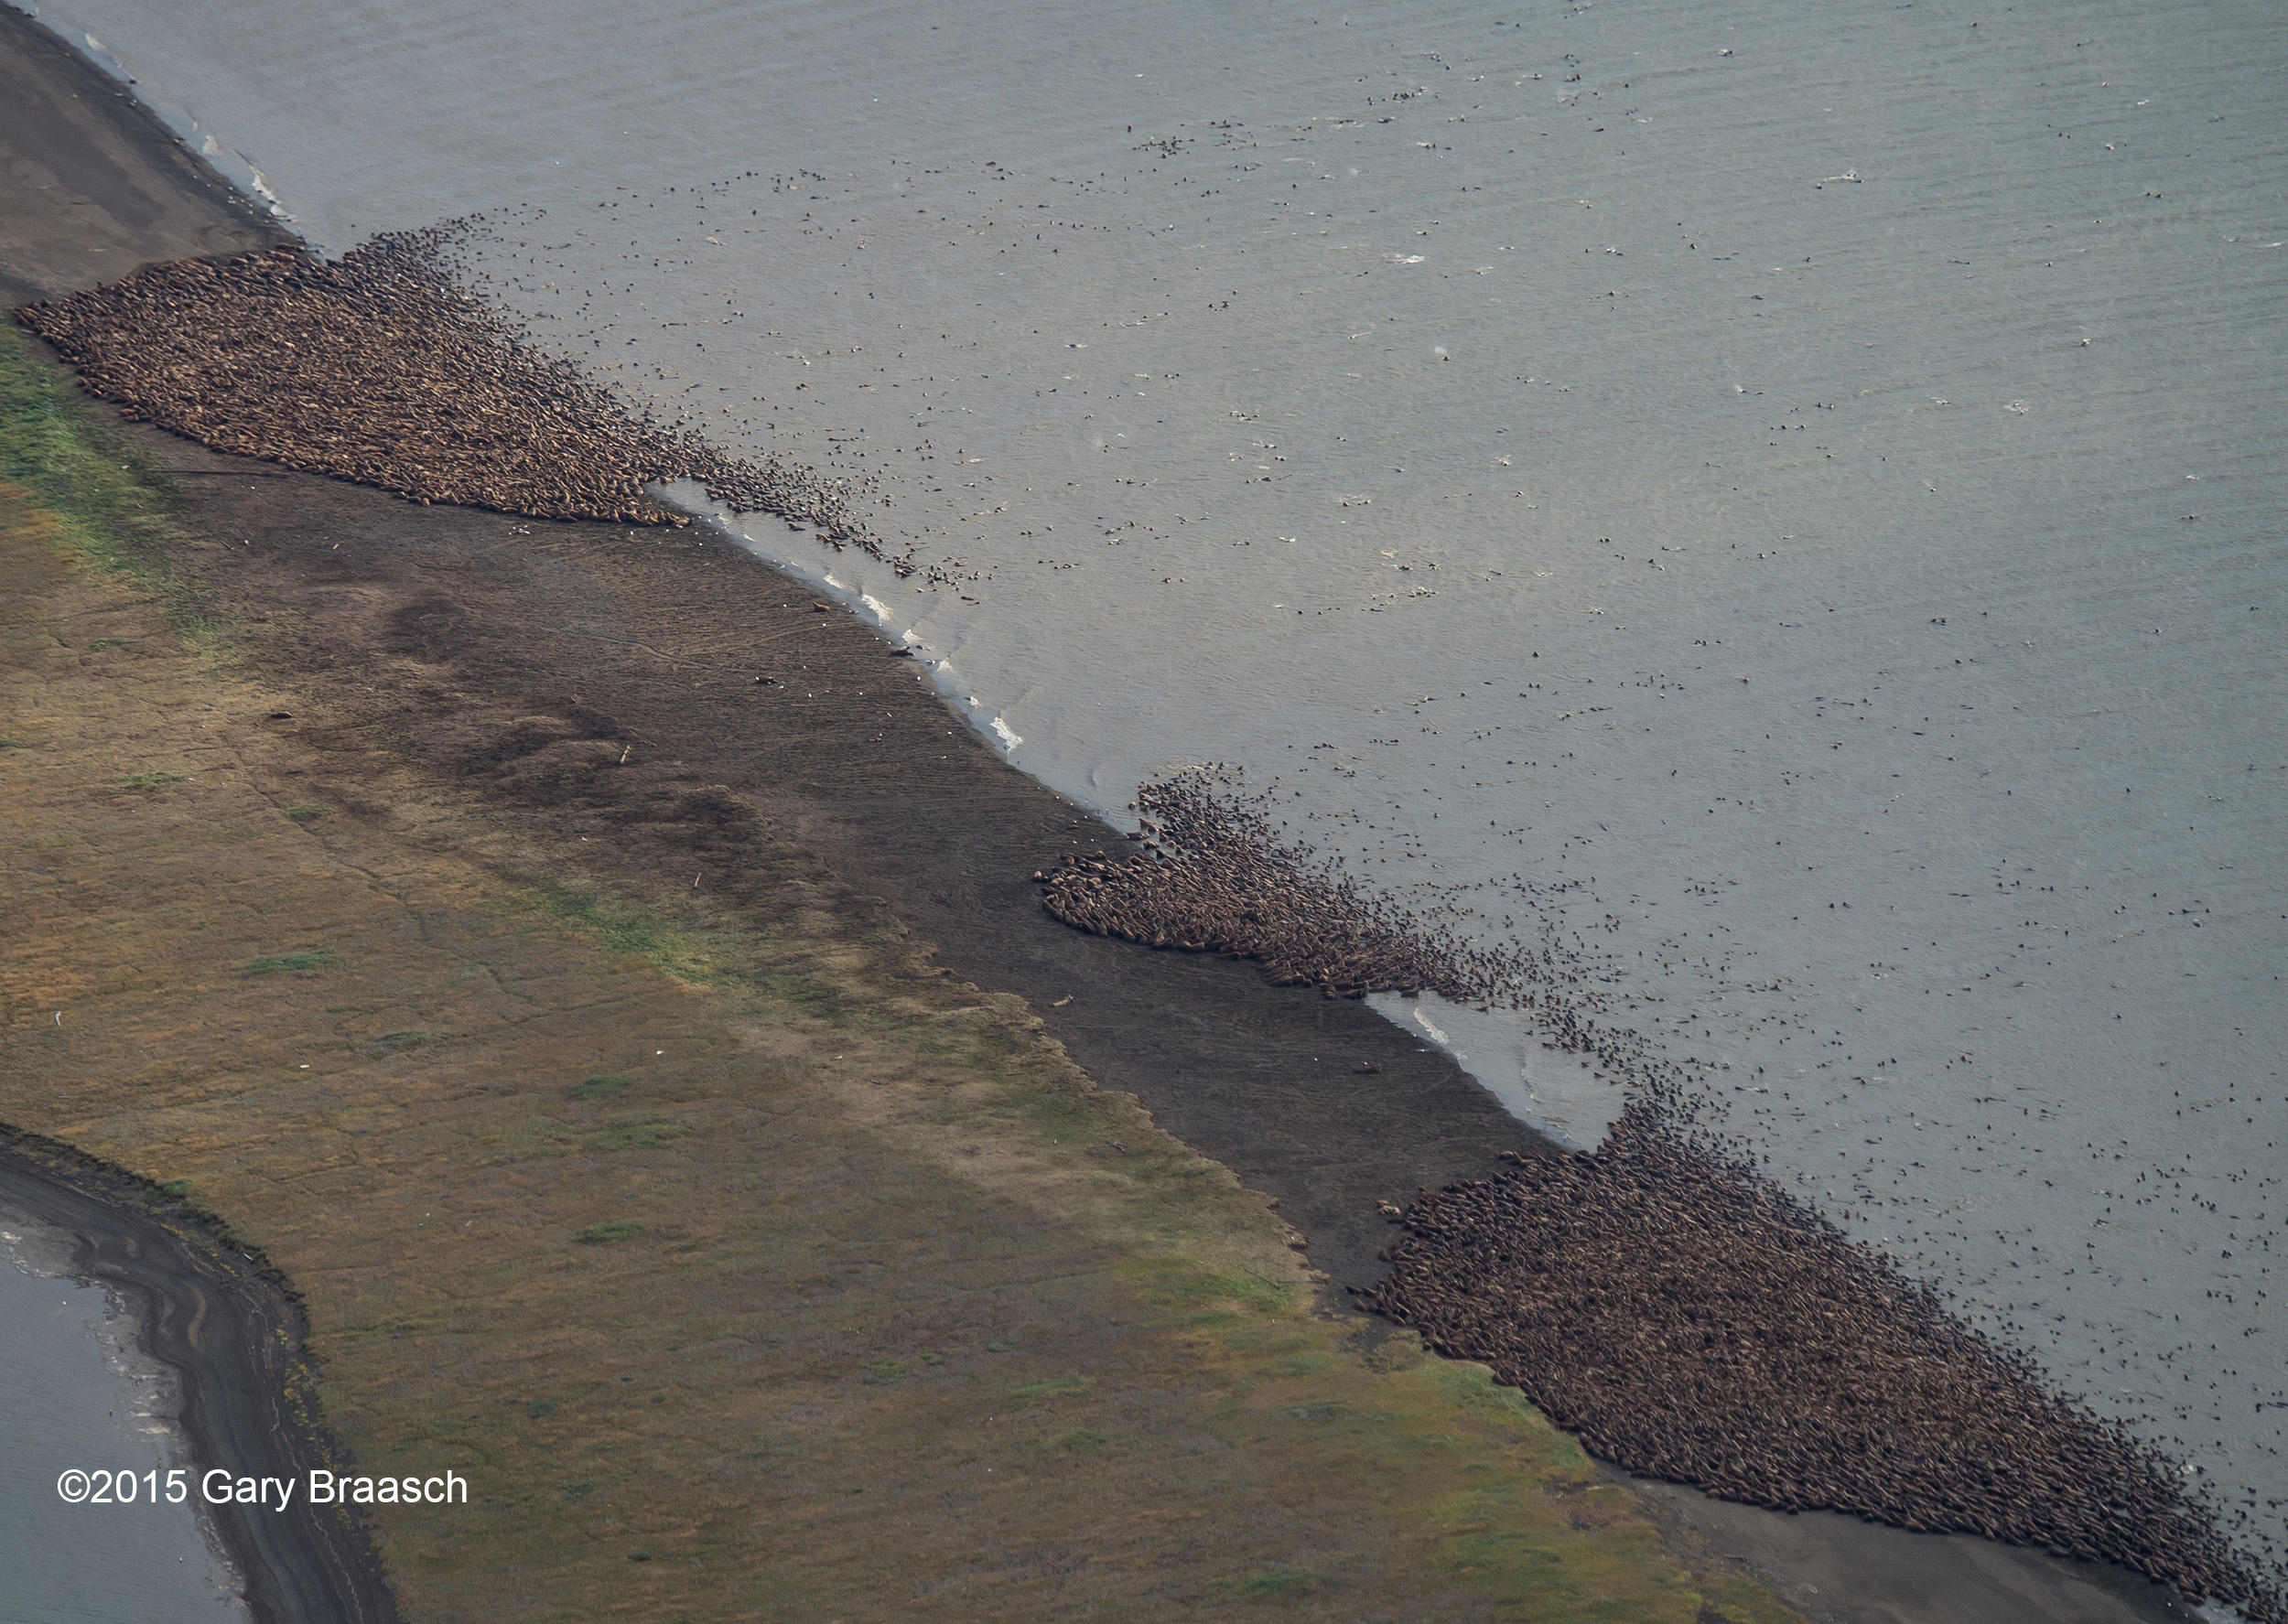 PHOTO: Aerial photographs made by Gary Braasch on Aug. 23, 2015 show thousands of Pacific walrus coming ashore near Point Lay in Alaska.